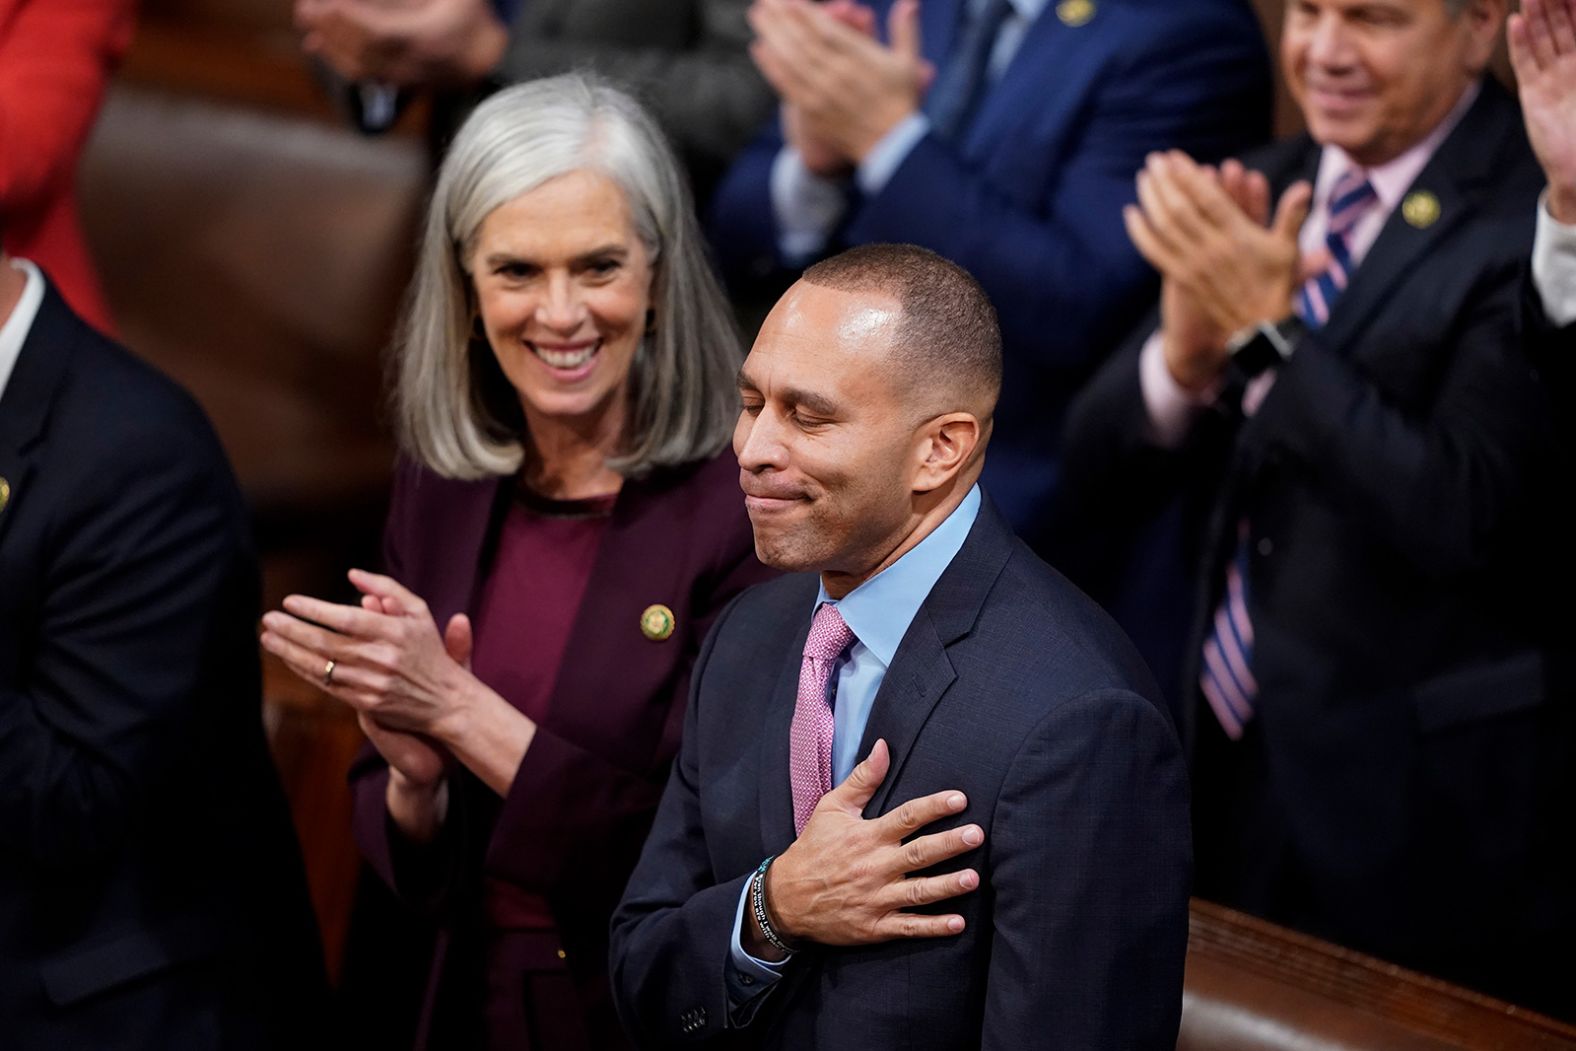 US Rep. Hakeem Jeffries, a Democrat from New York who will become <a href="index.php?page=&url=https%3A%2F%2Fwww.cnn.com%2F2023%2F01%2F04%2Fpolitics%2Fhakeem-jeffries-history-first-black-party-leader%2Findex.html" target="_blank">the first Black lawmaker to lead a party in Congress</a>, acknowledges applause during a House speakership vote on Tuesday, January 3.